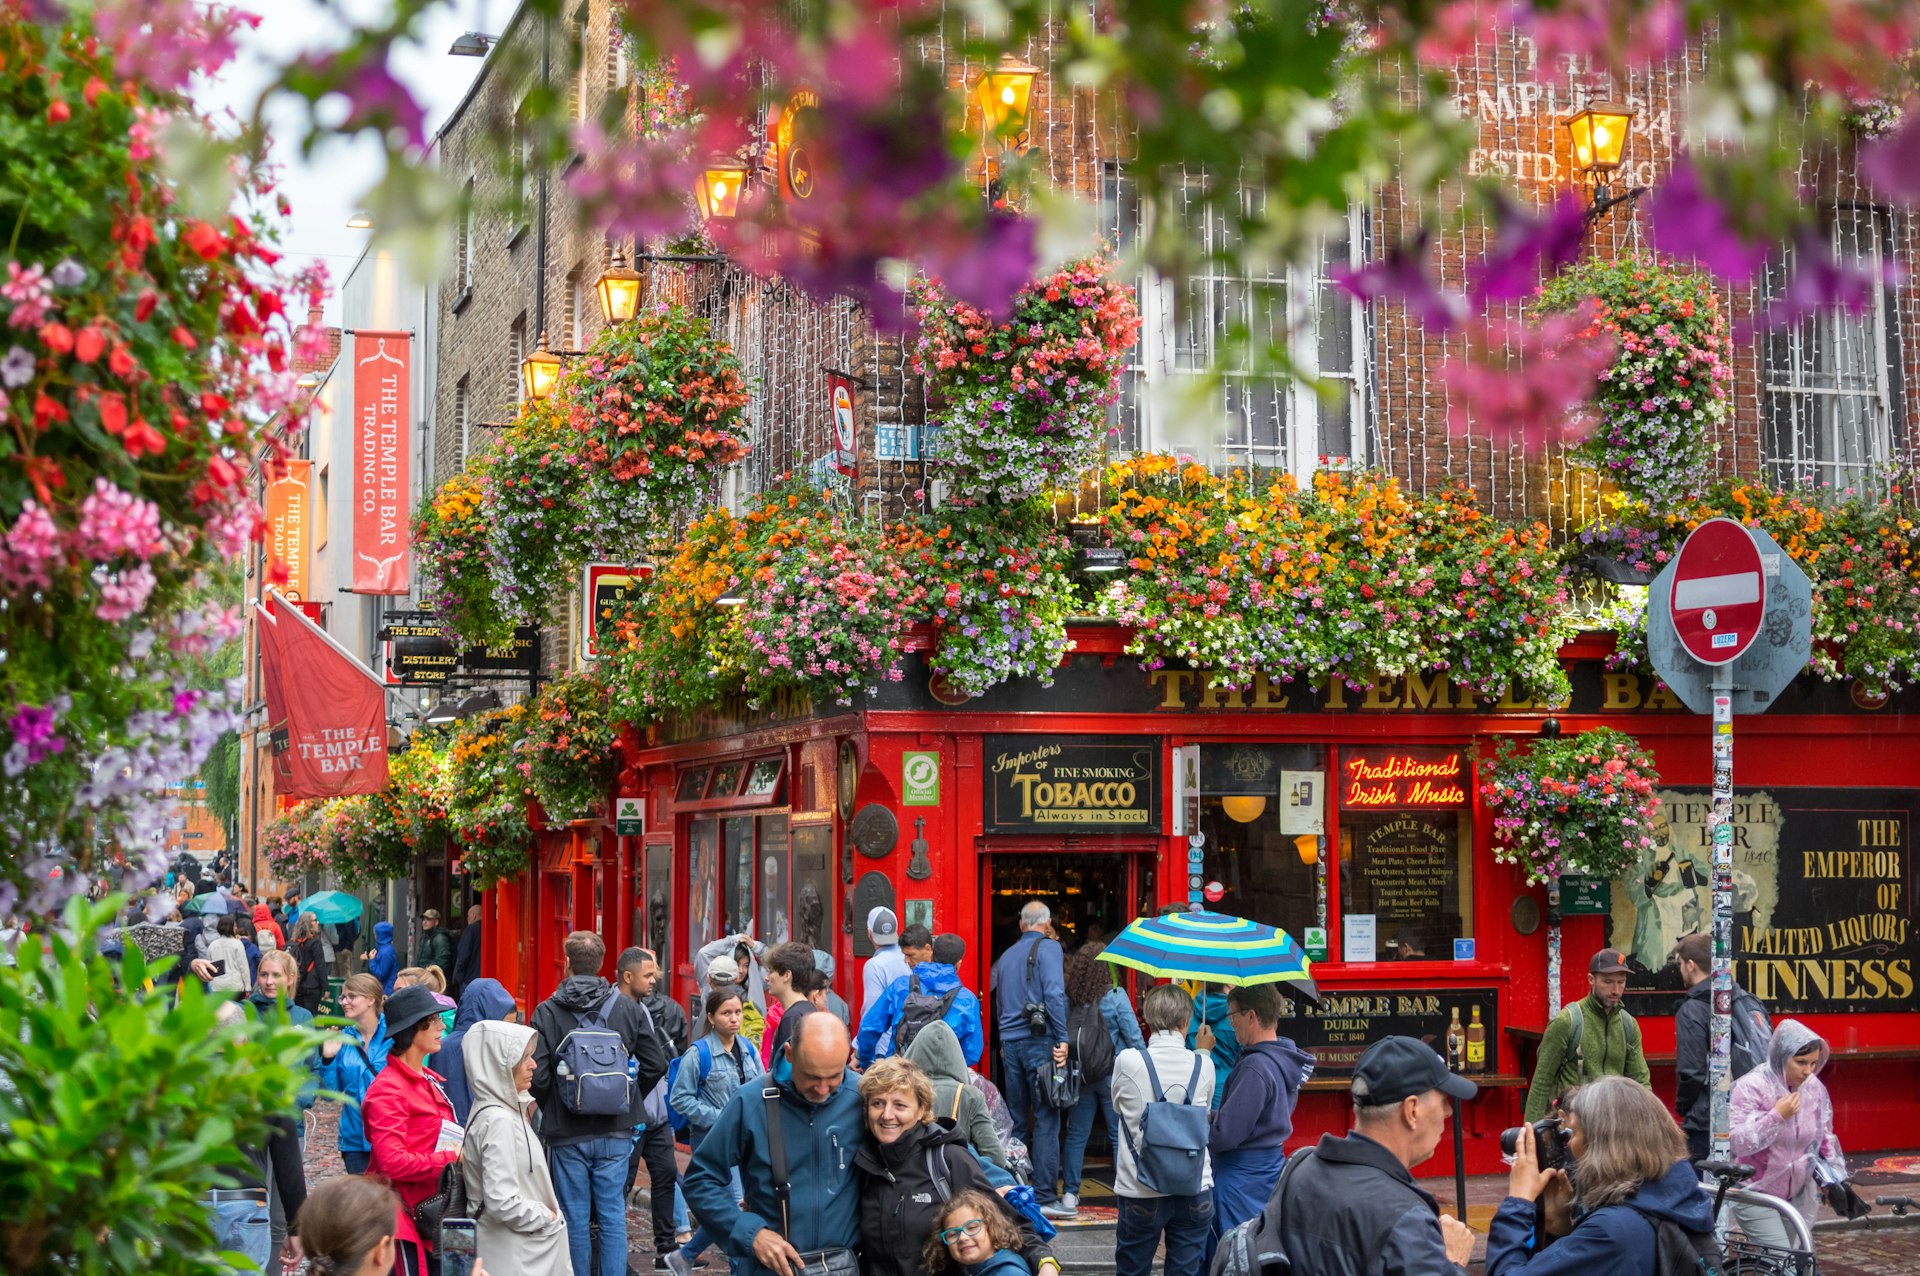 A colourful scene of crowds of people outside The Temple Bar in Dublin. Some walk along the streets while others gather to take photos.